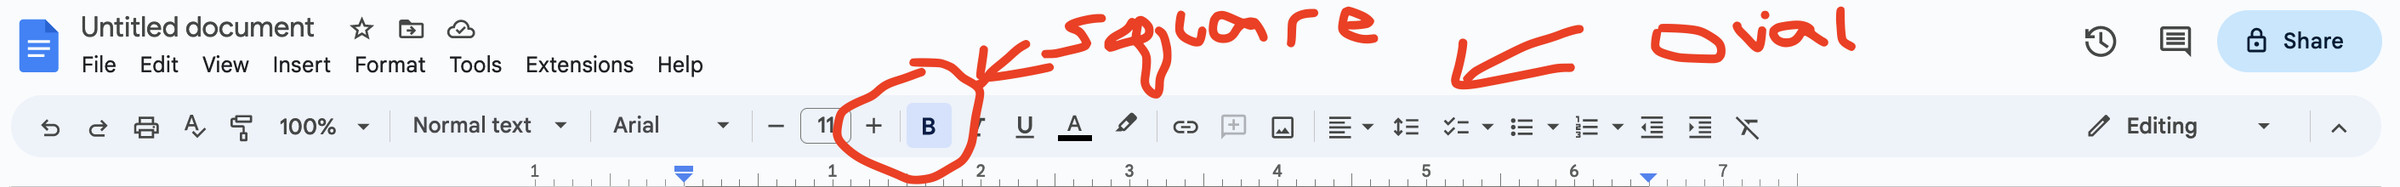 A screenshot of the Google Docs toolbar, with “oval” and “square” buttons helpfully highlighted